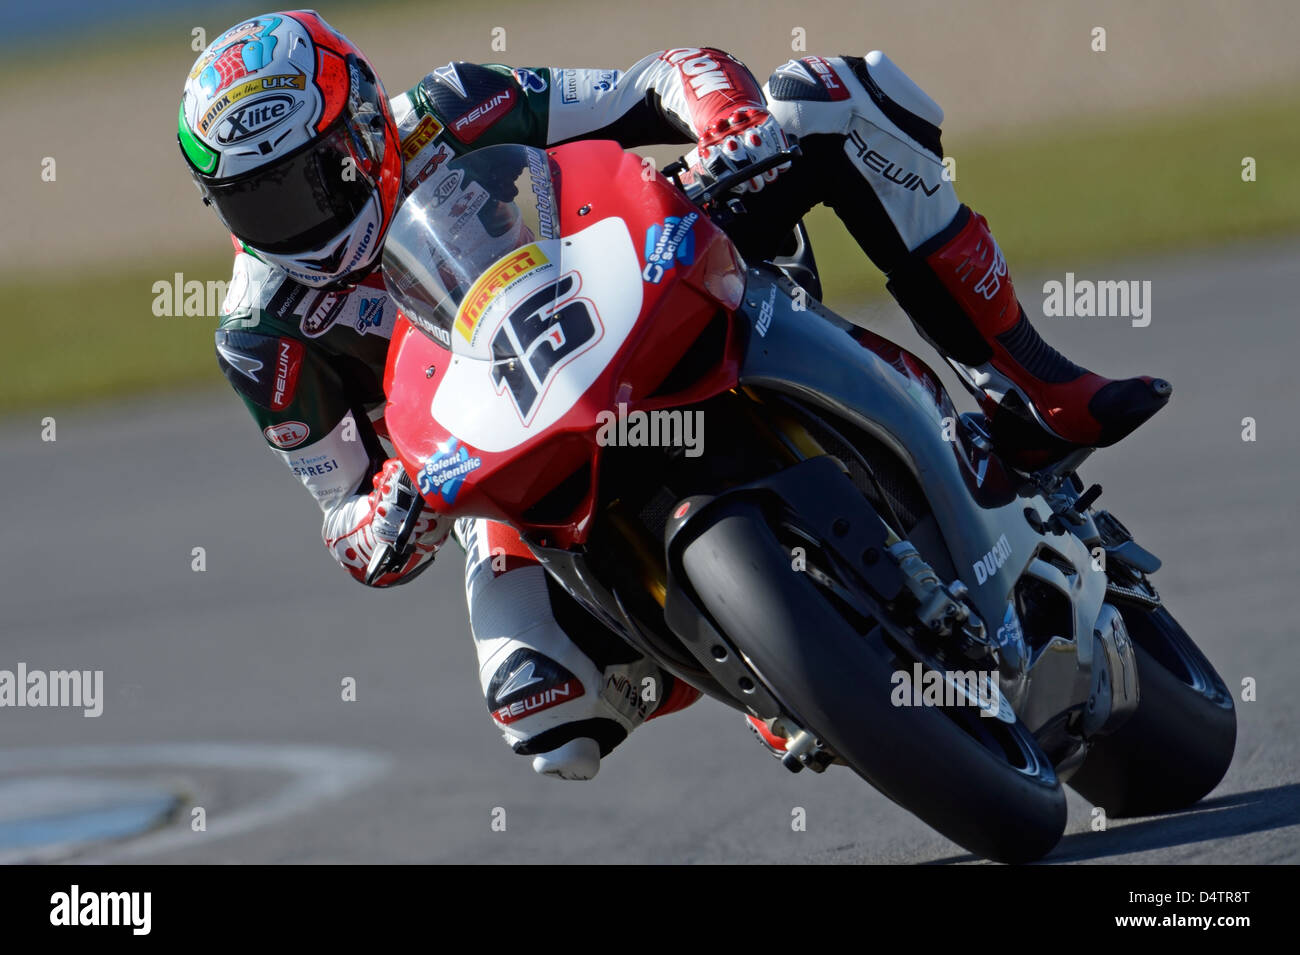 matteo baiocco on the ducati, bsb 2013 Stock Photo